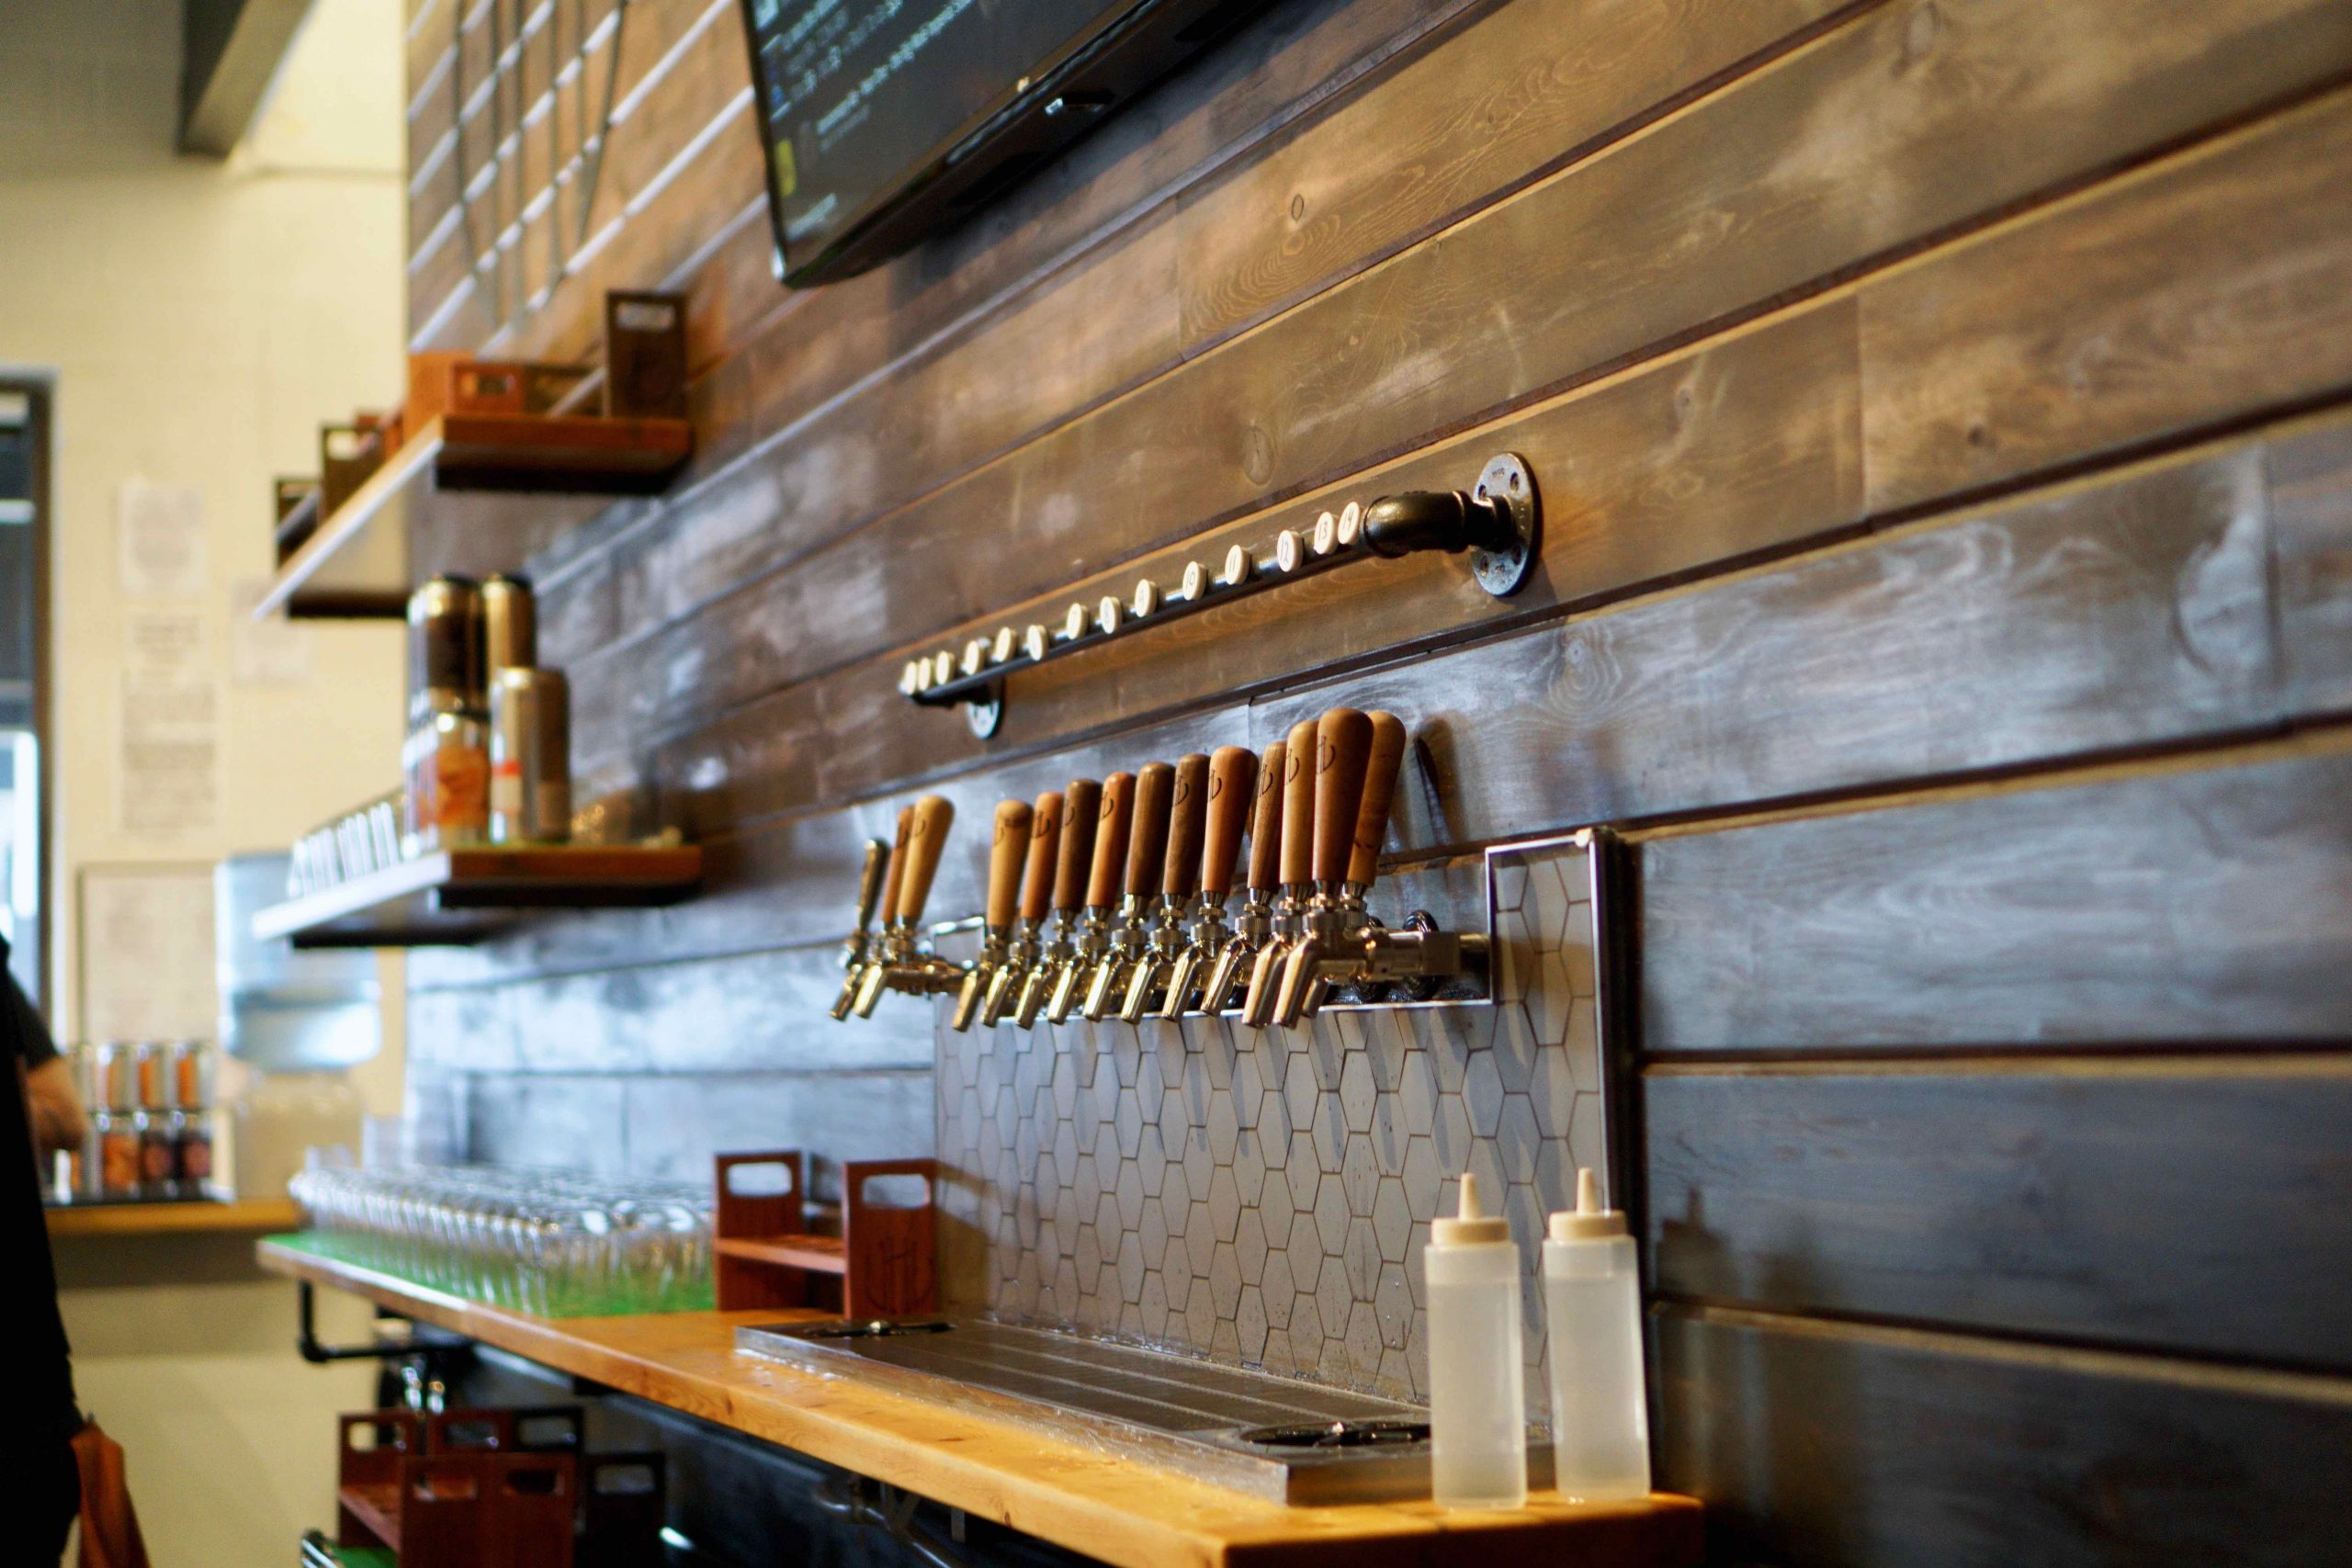 Taps at Uhl's Brewing Company